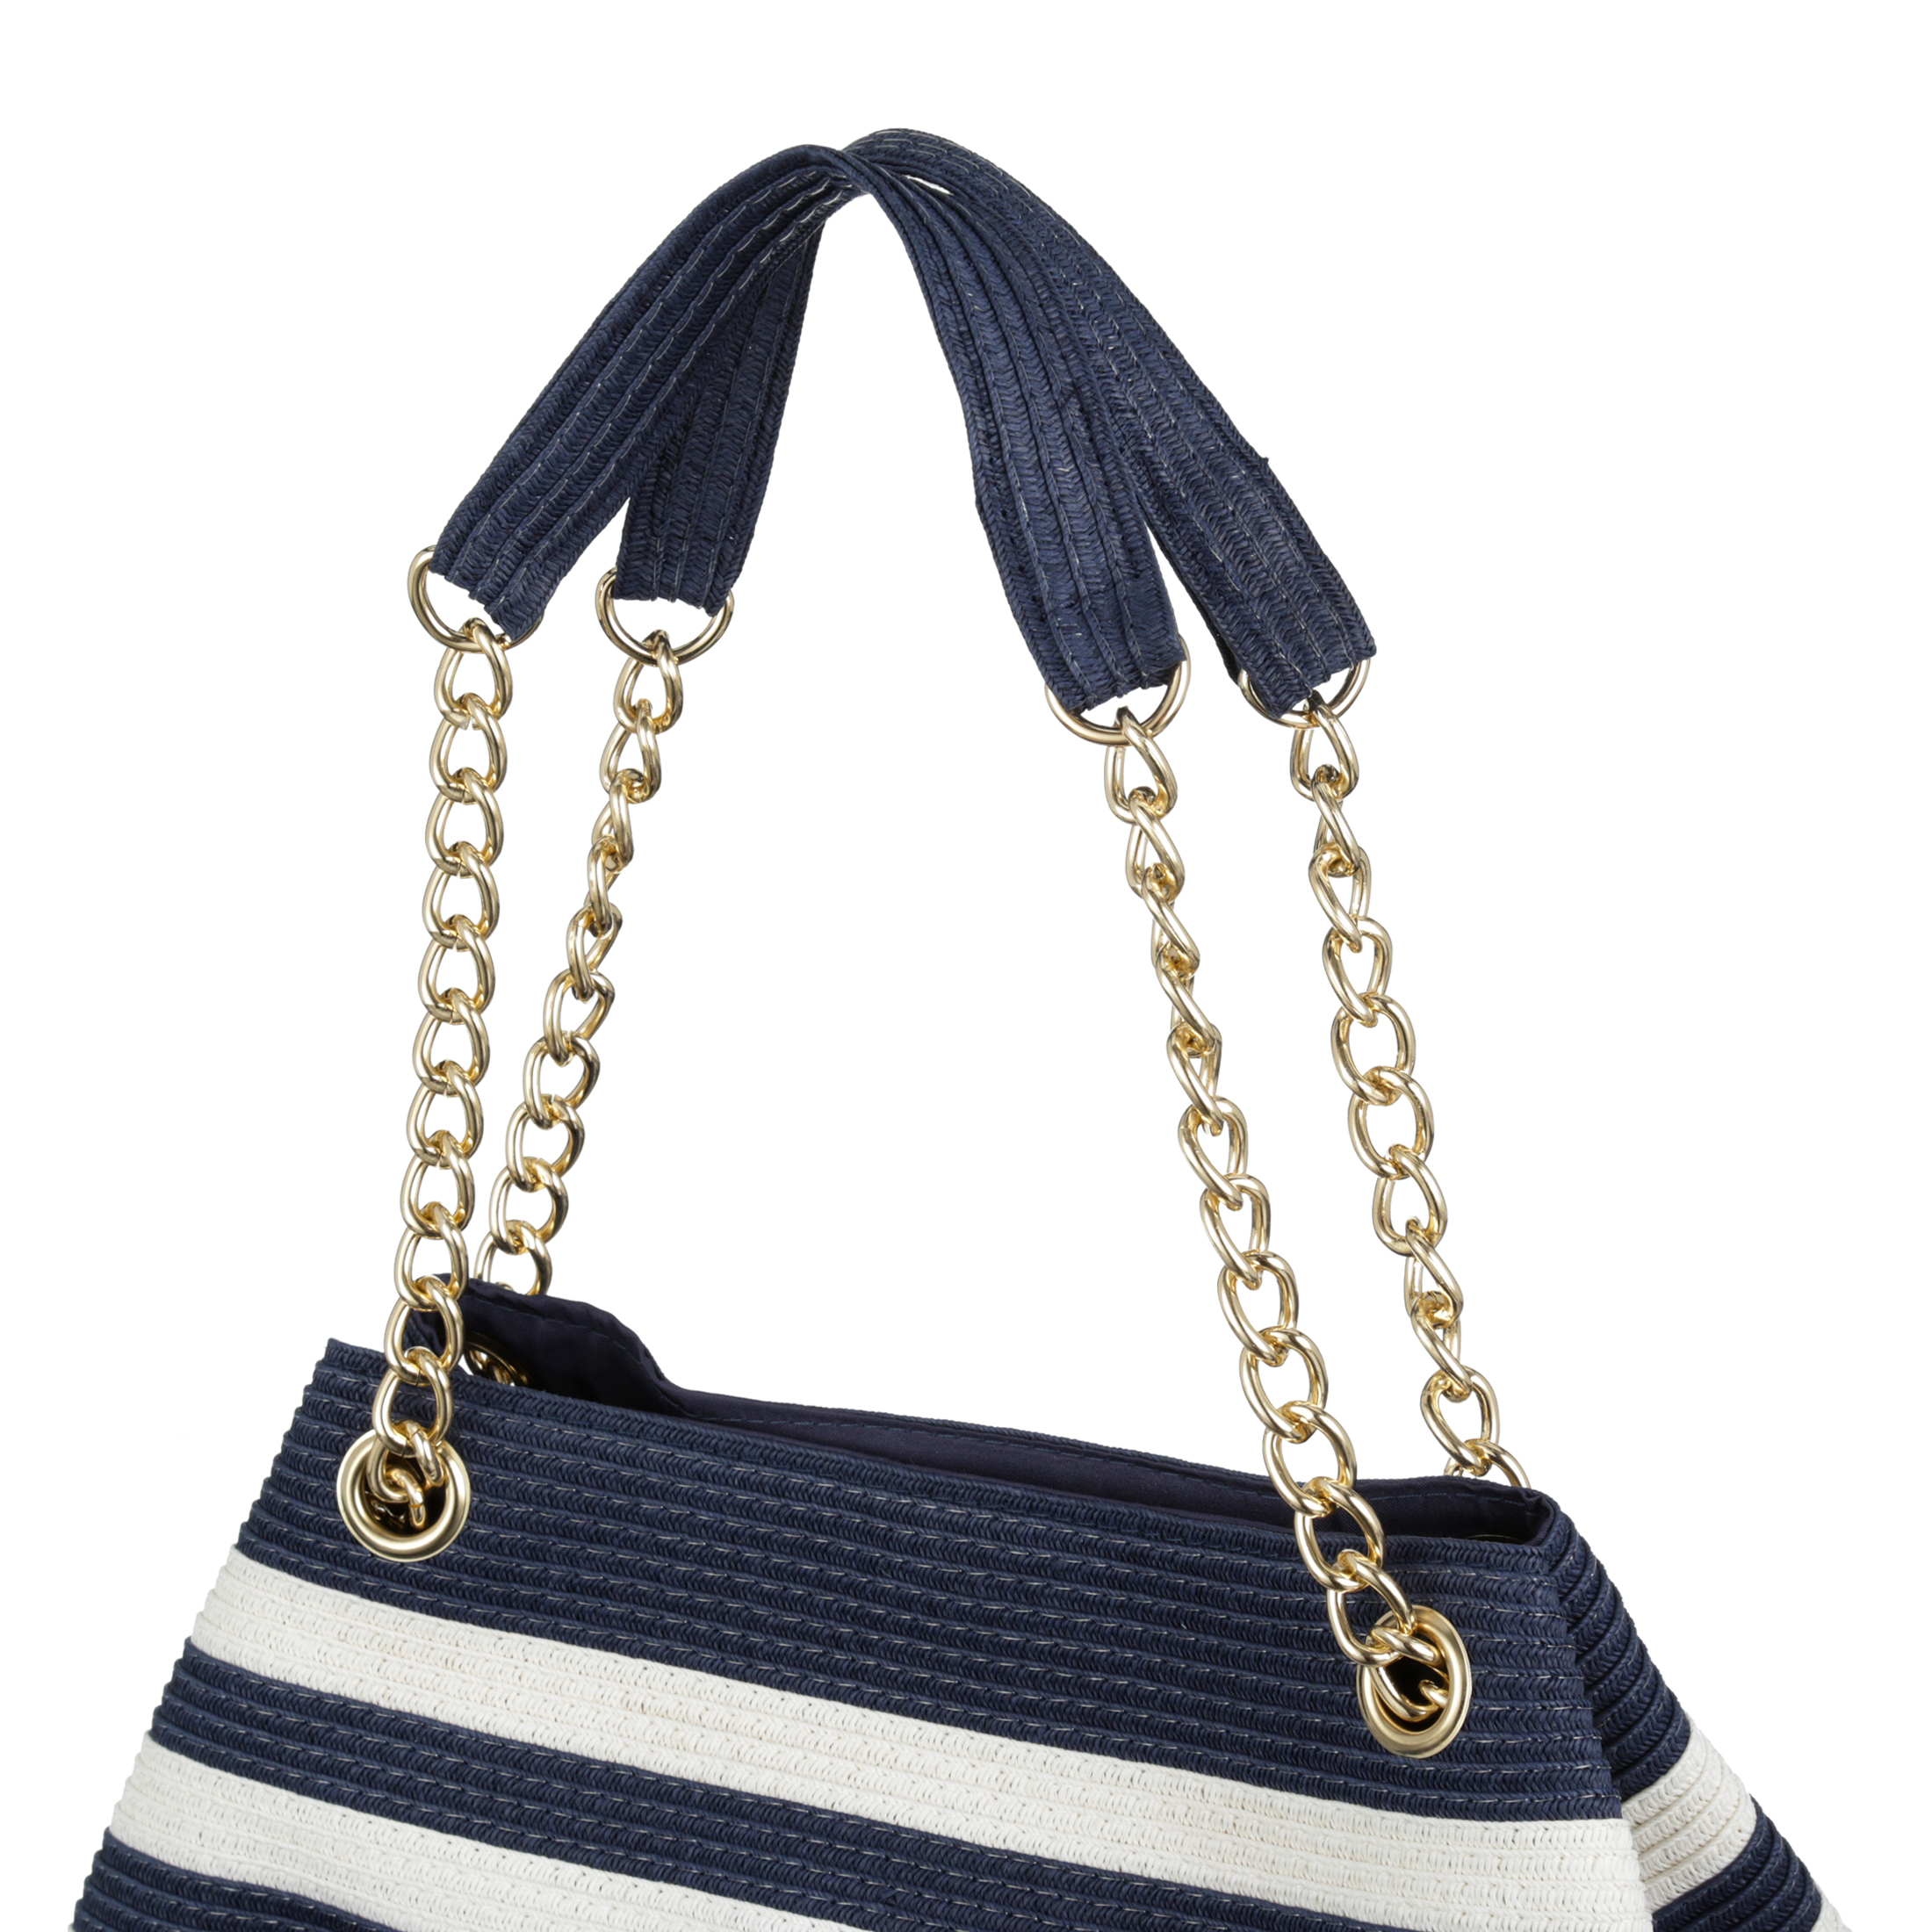 Magid Women's Adult Paper Straw Beach Handbag with Gold Chain Navy White - image 3 of 4